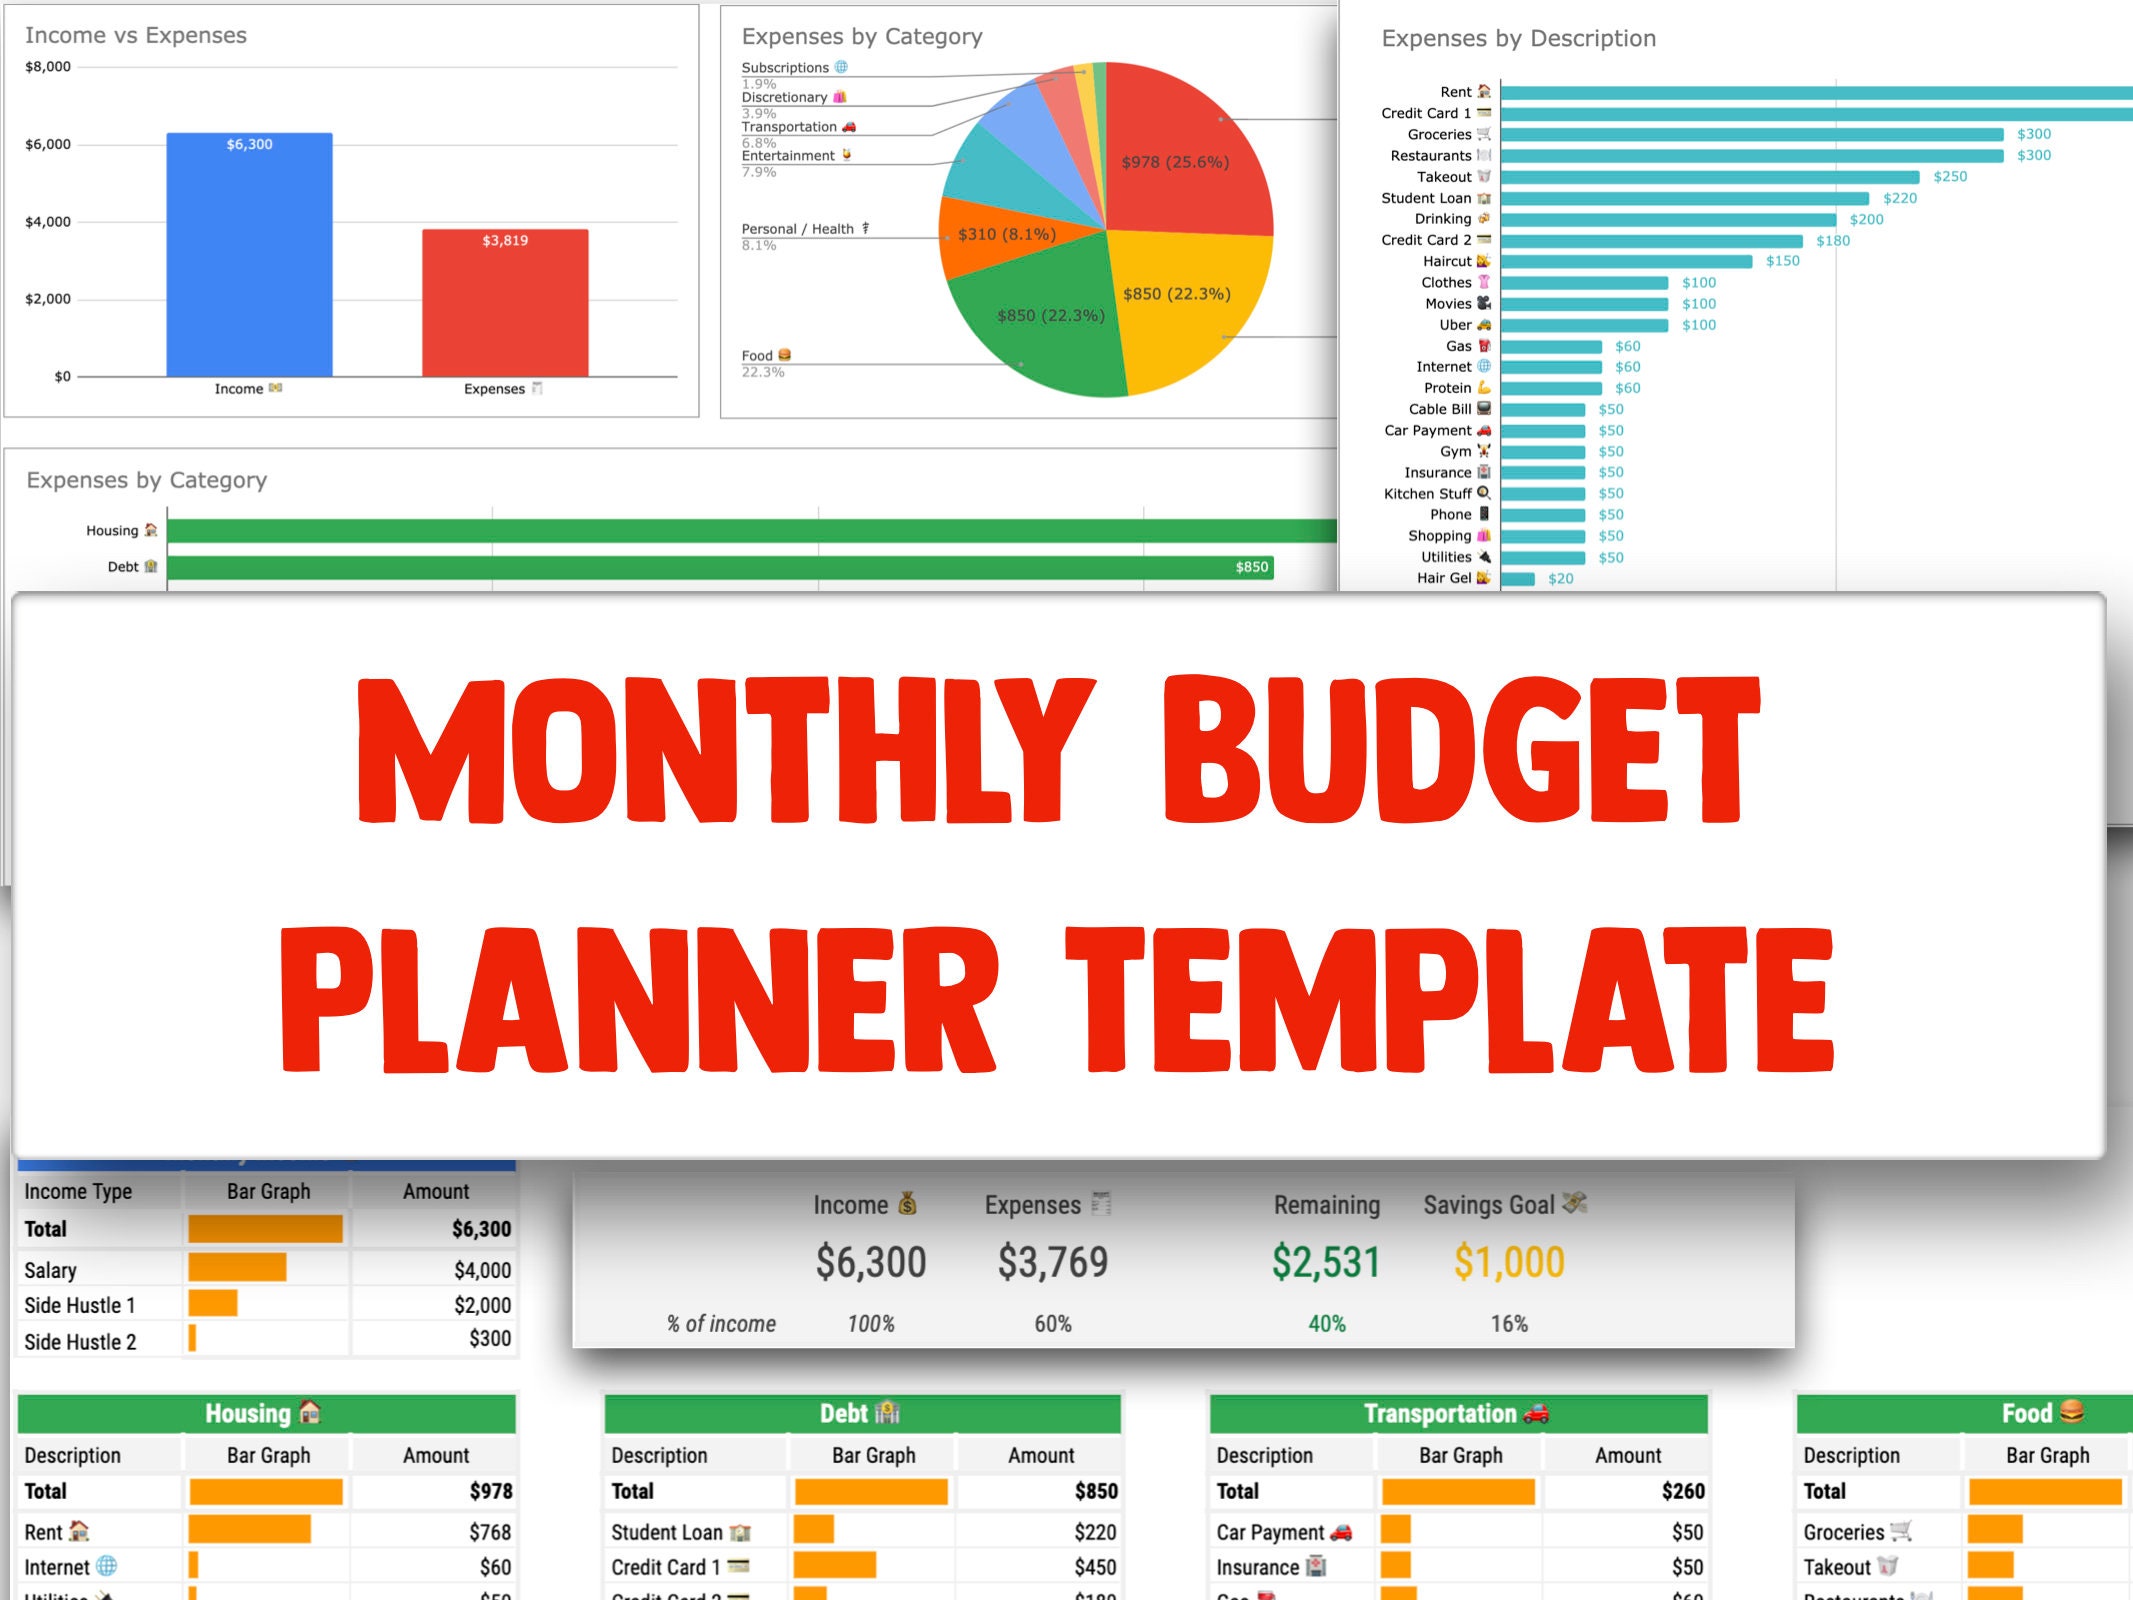 monthly-budget-spreadsheet-google-sheets-budget-template